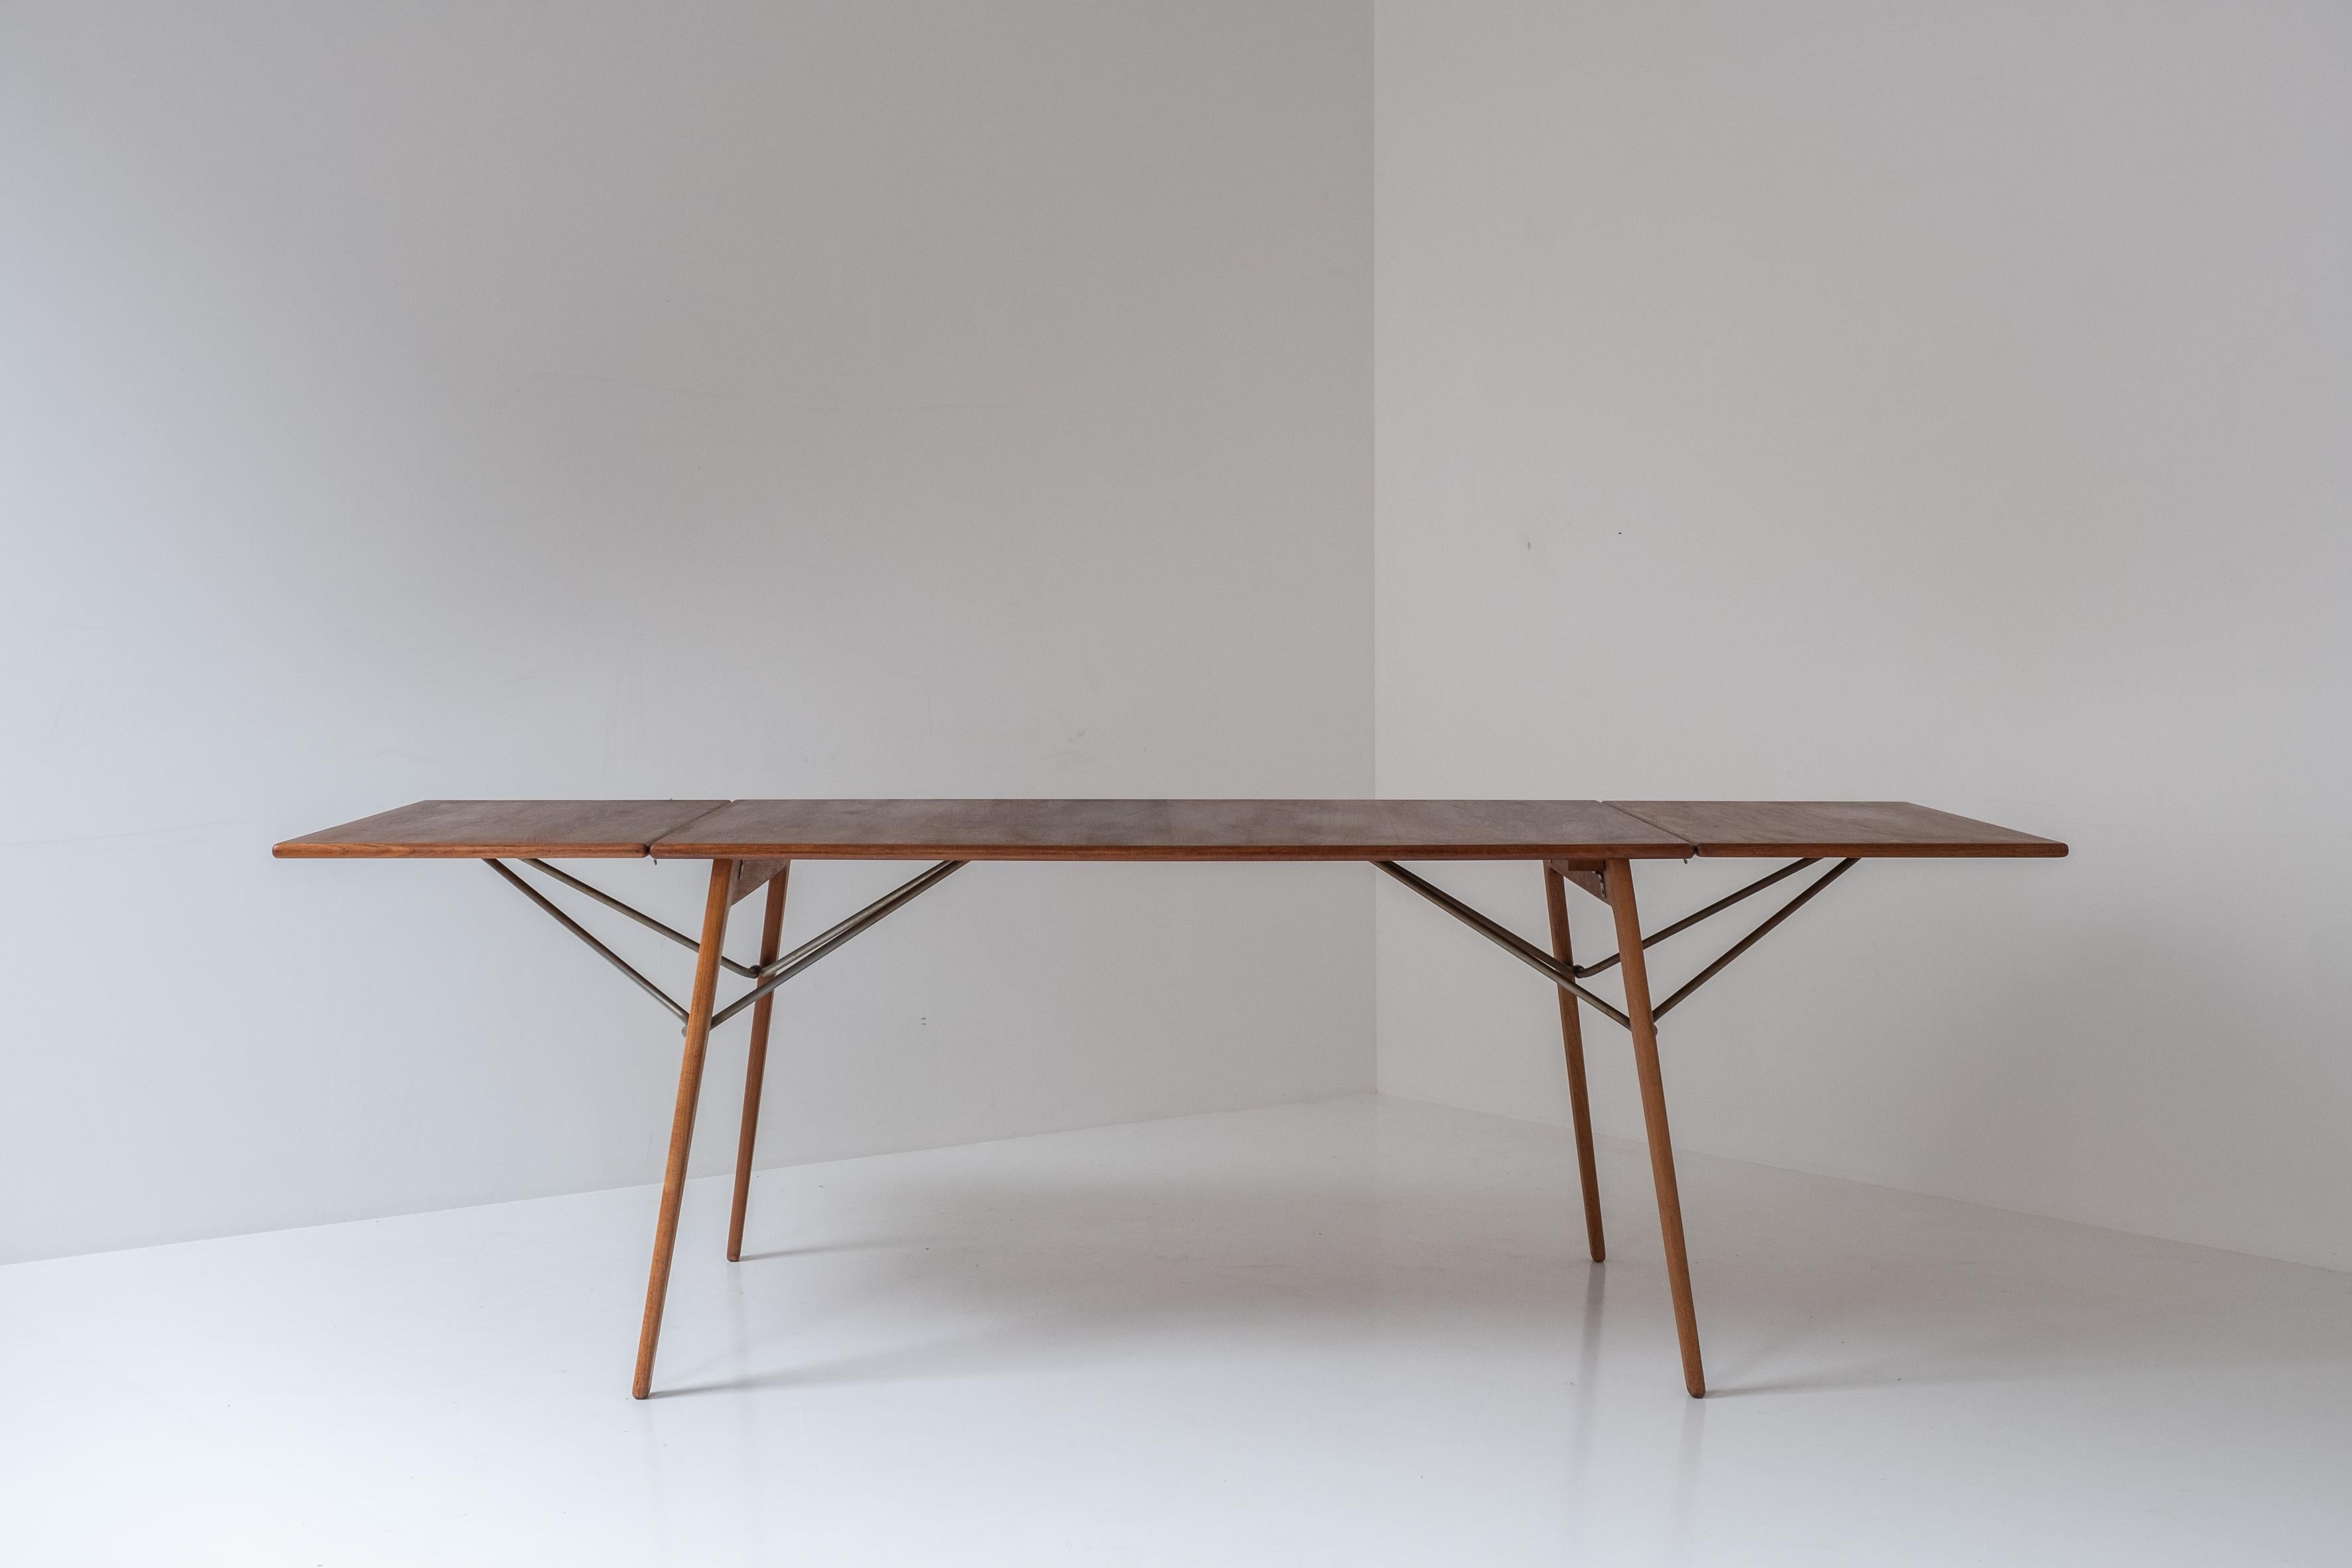 Rare version of this drop leaf table by Børge Mogensen for Søborg Mobelfabrik, Denmark 1953. This is model 162 and is made out of oak, teak and steel. Presented in its original untouched condition with a beautifull soft overall patina. The table has